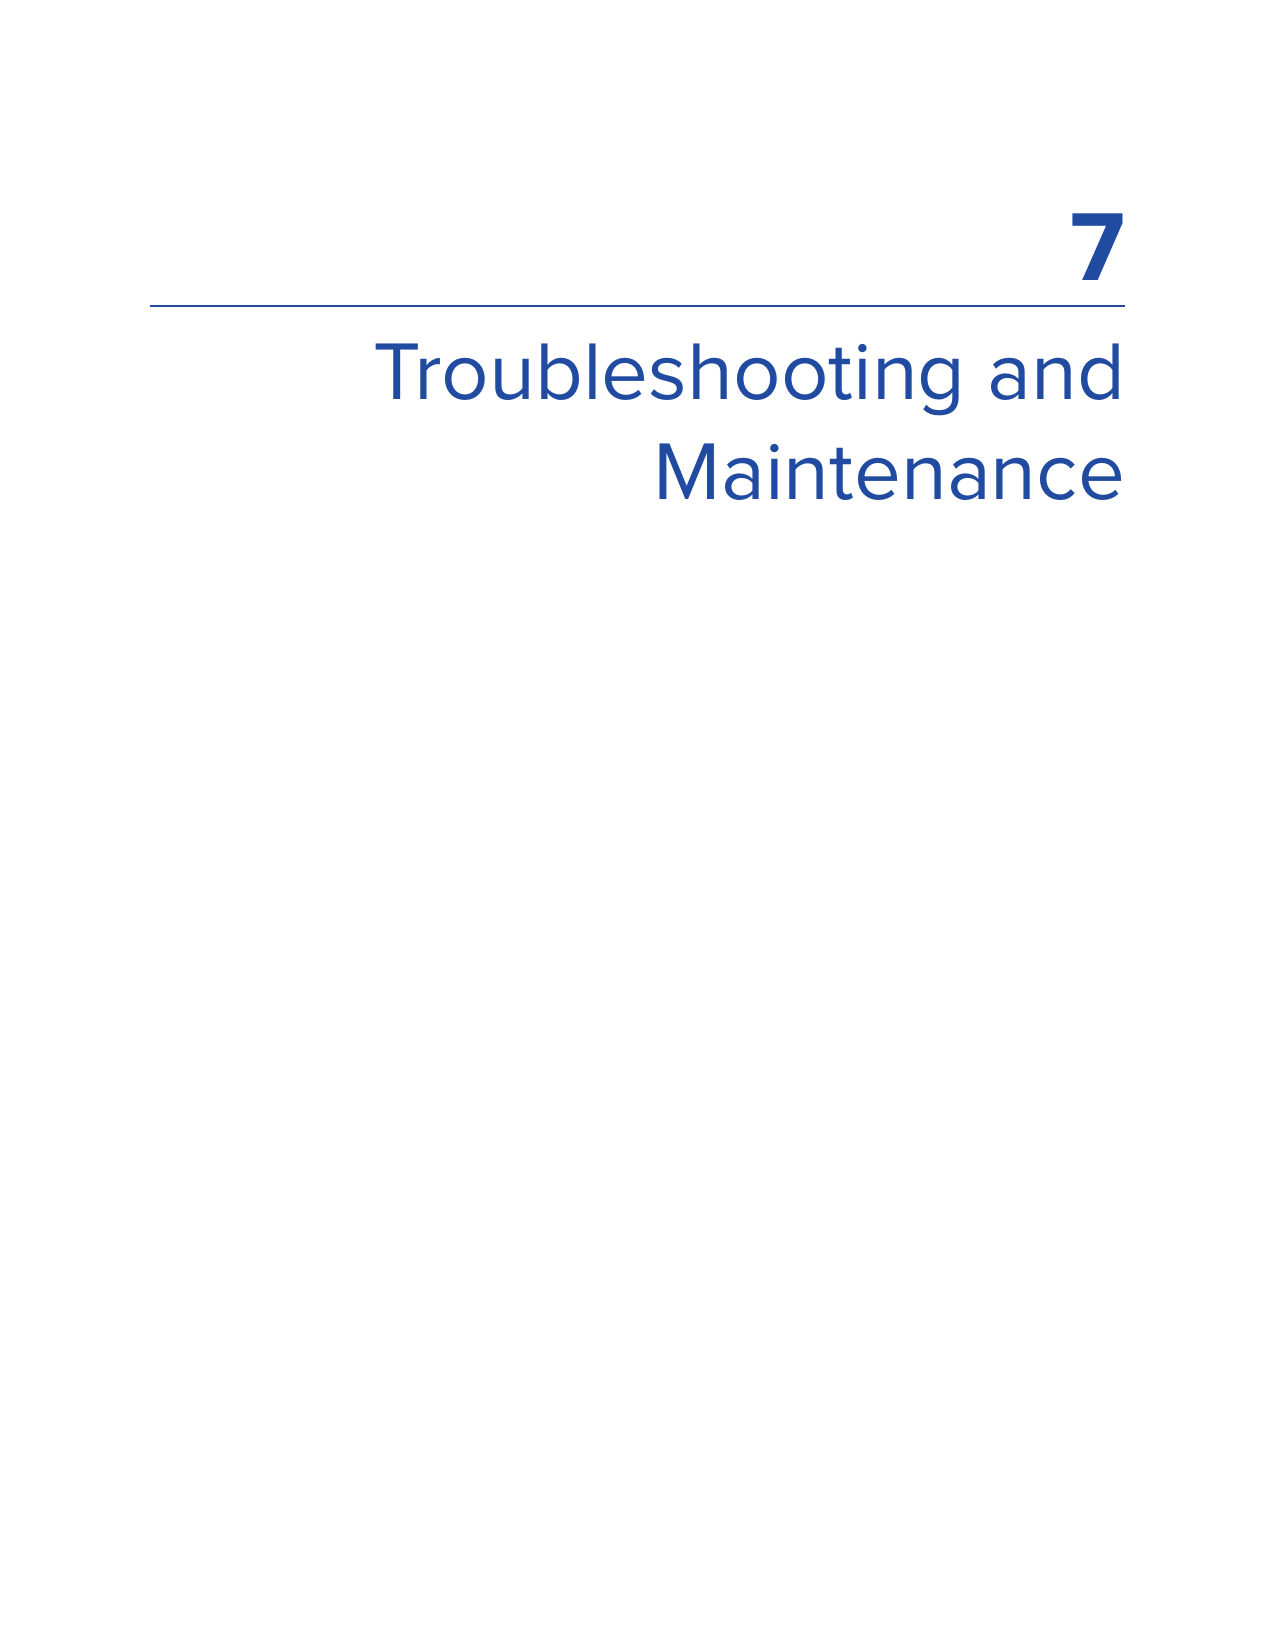 7Troubleshooting and Maintenance